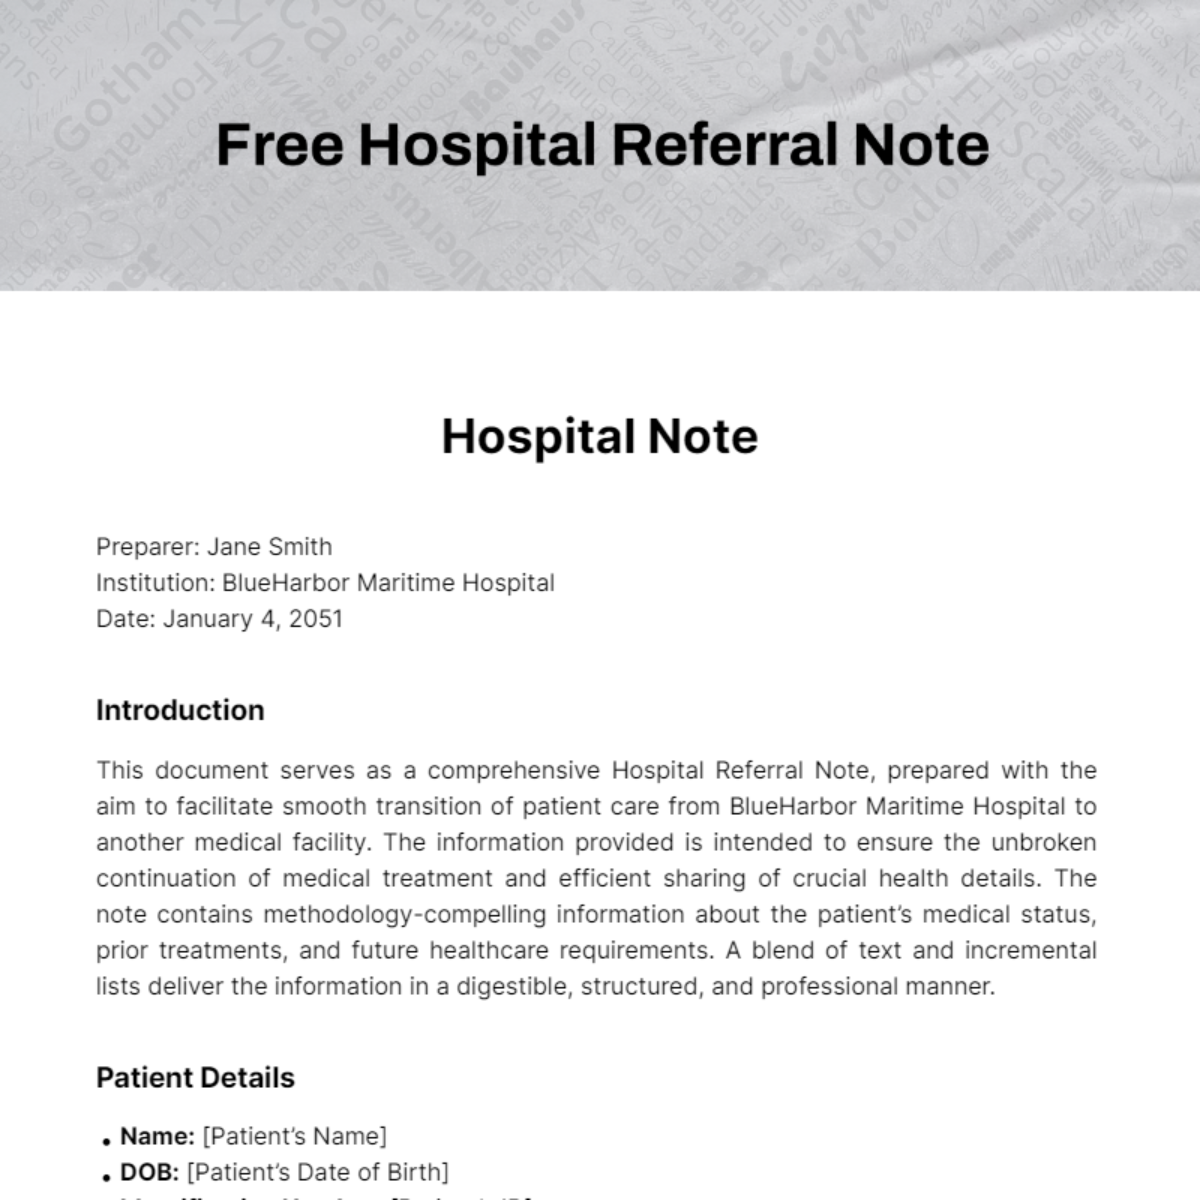 Hospital Referral Note Template - Edit Online & Download Example ...